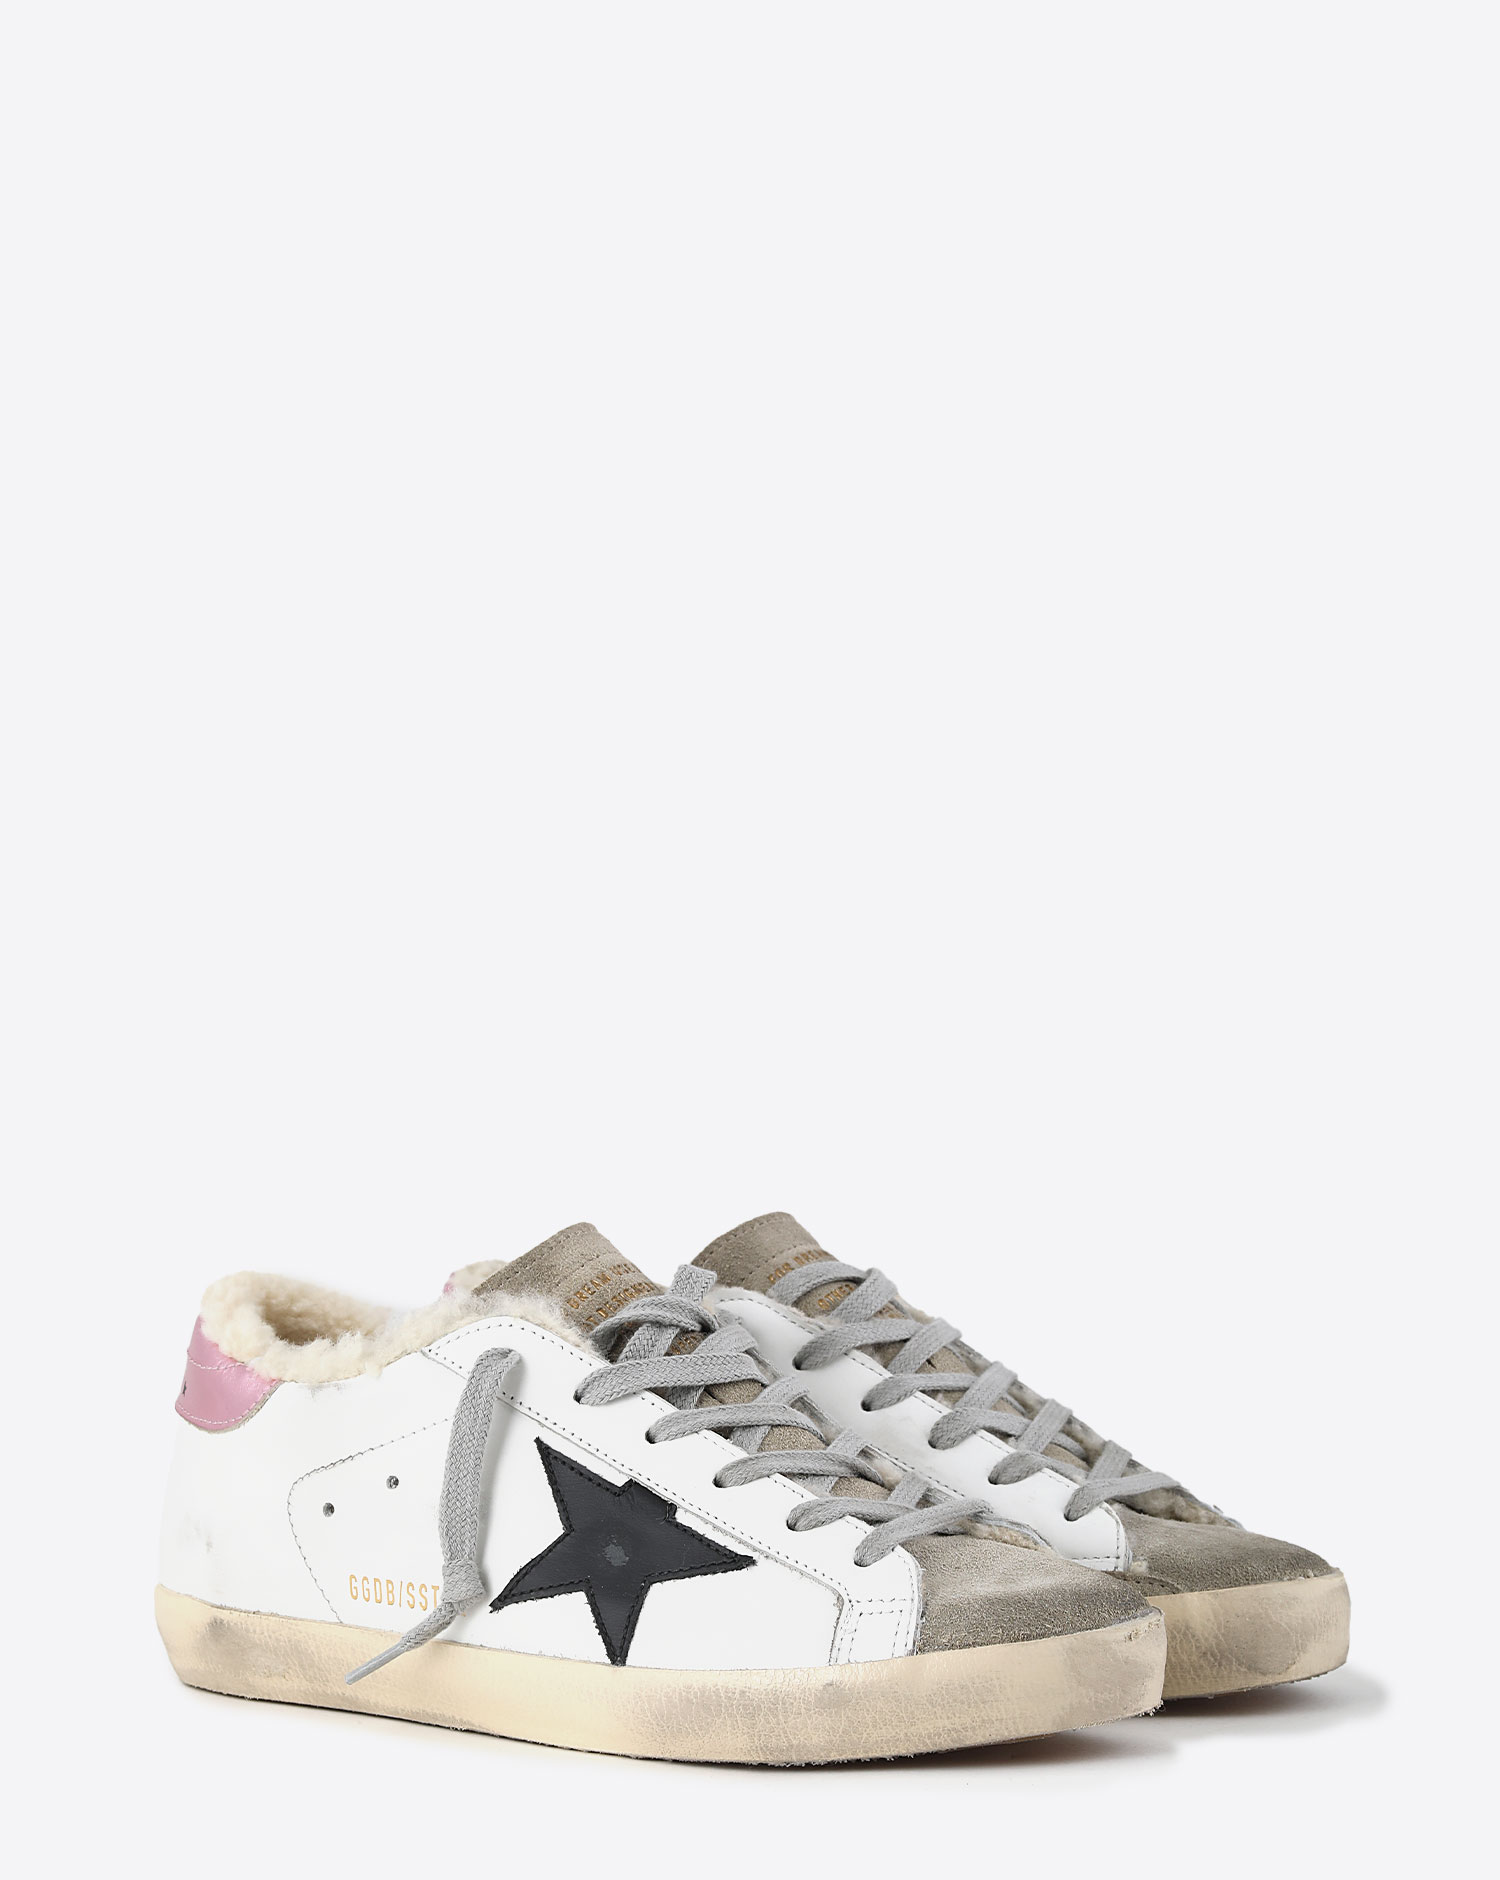 Golden Goose Woman Collection Super-Star – White Black Pink Shearling 11165